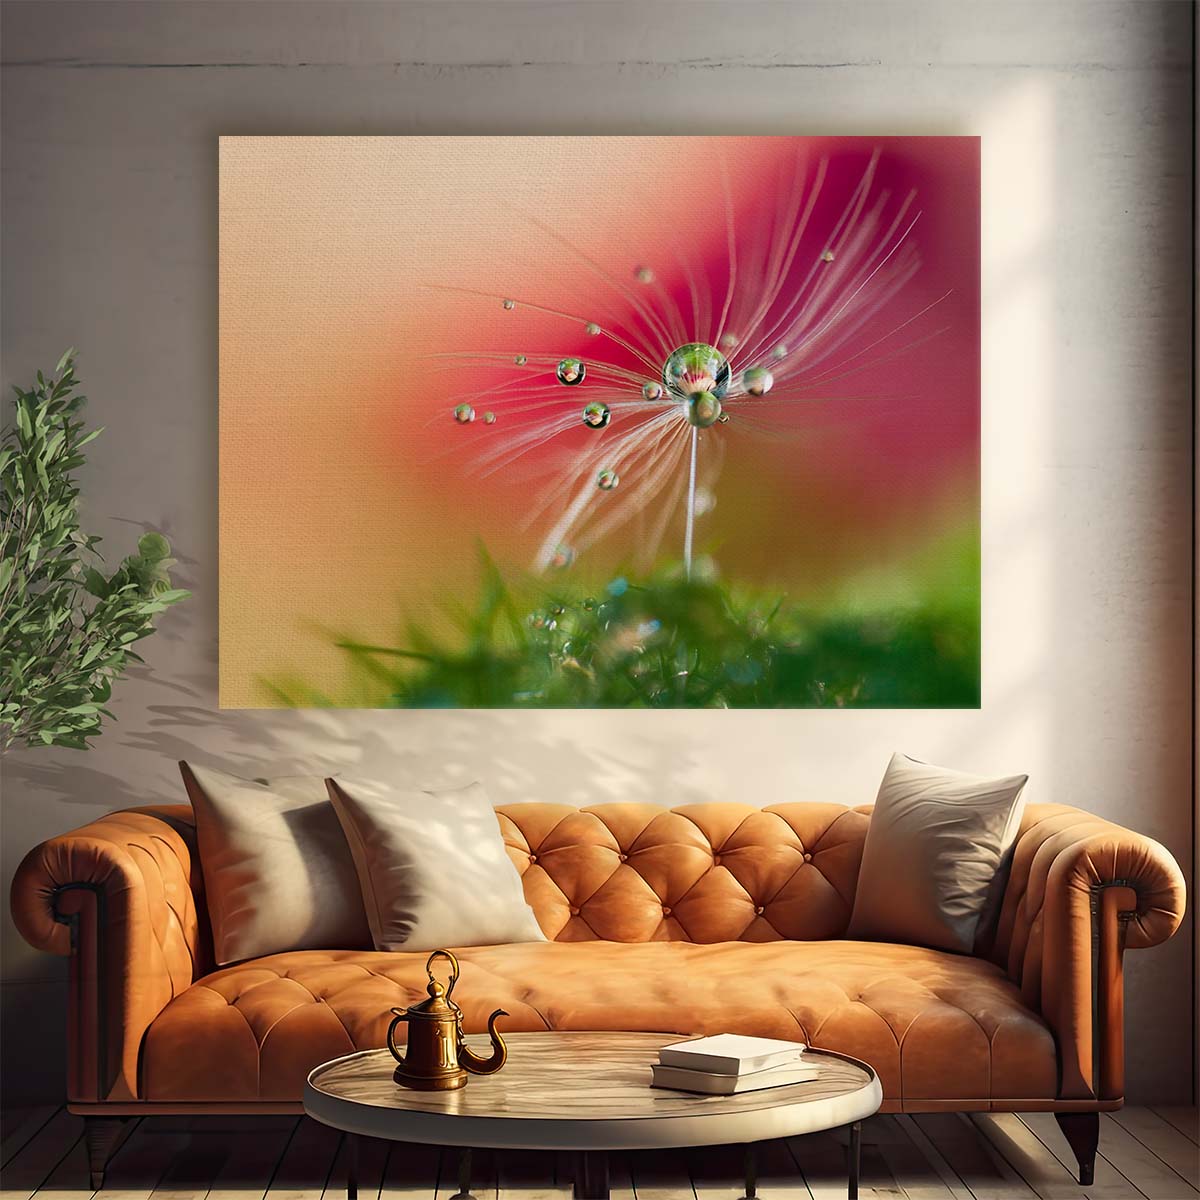 Red Macro Dandelion Seed Droplets Bokeh Wall Art by Luxuriance Designs. Made in USA.